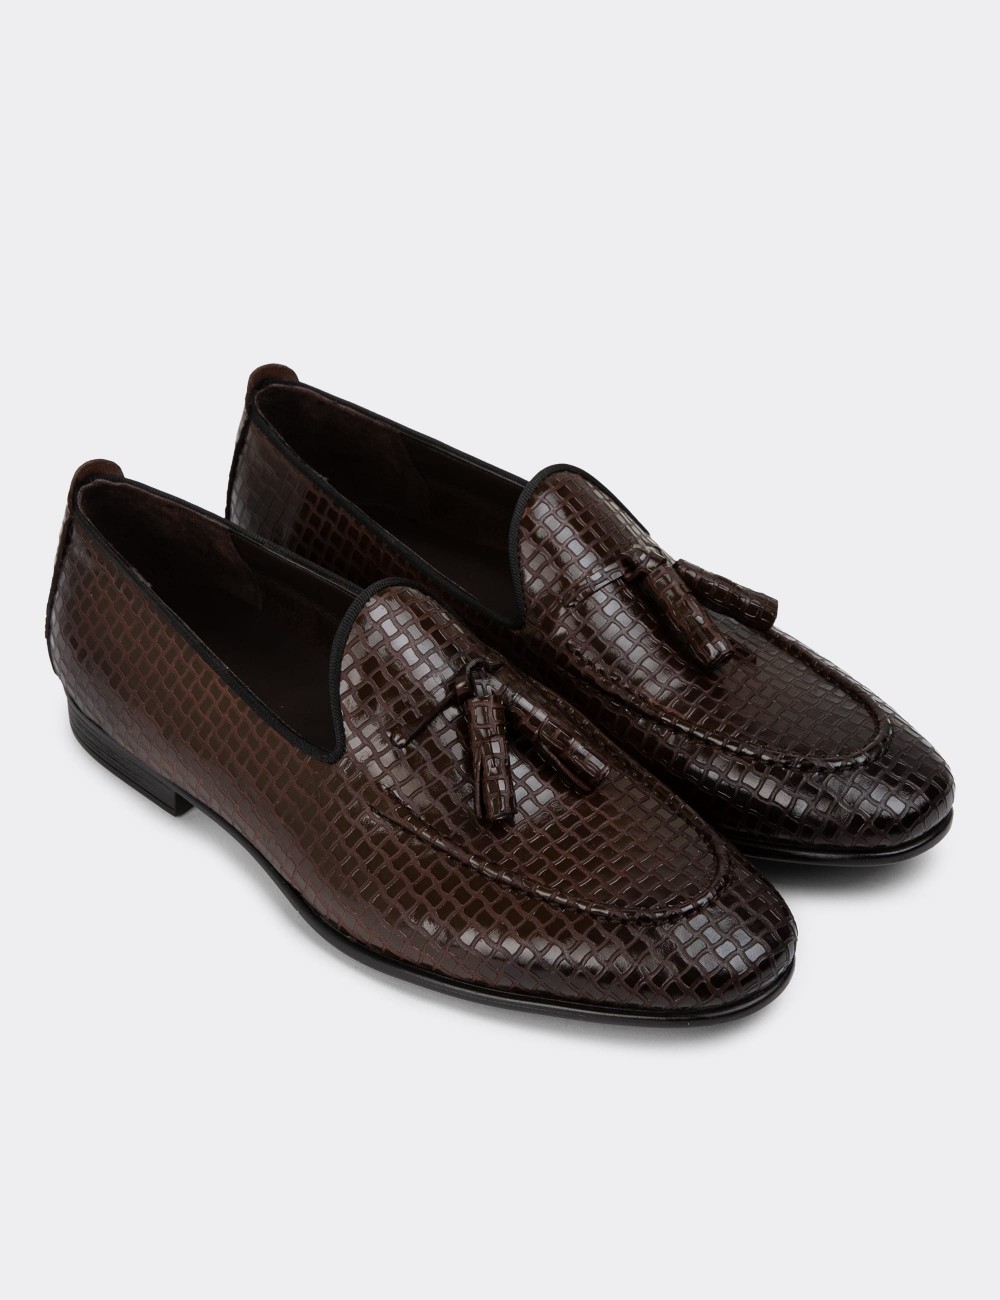 Brown Leather Loafers - 01701MKHVC21